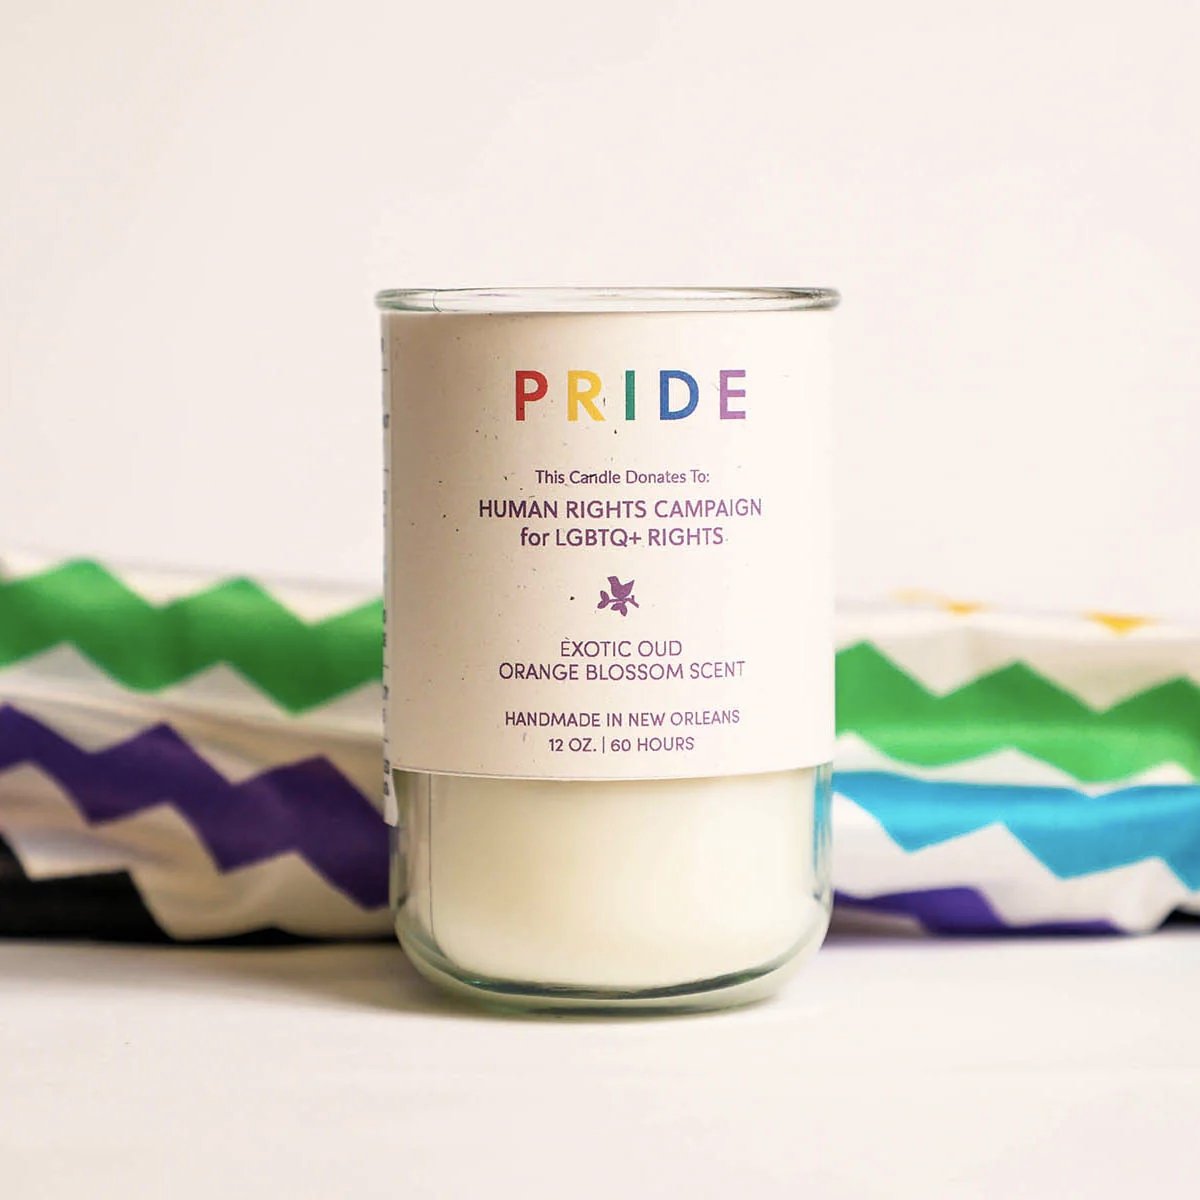 Candles by Goods that Matter - Dirty Coast Press